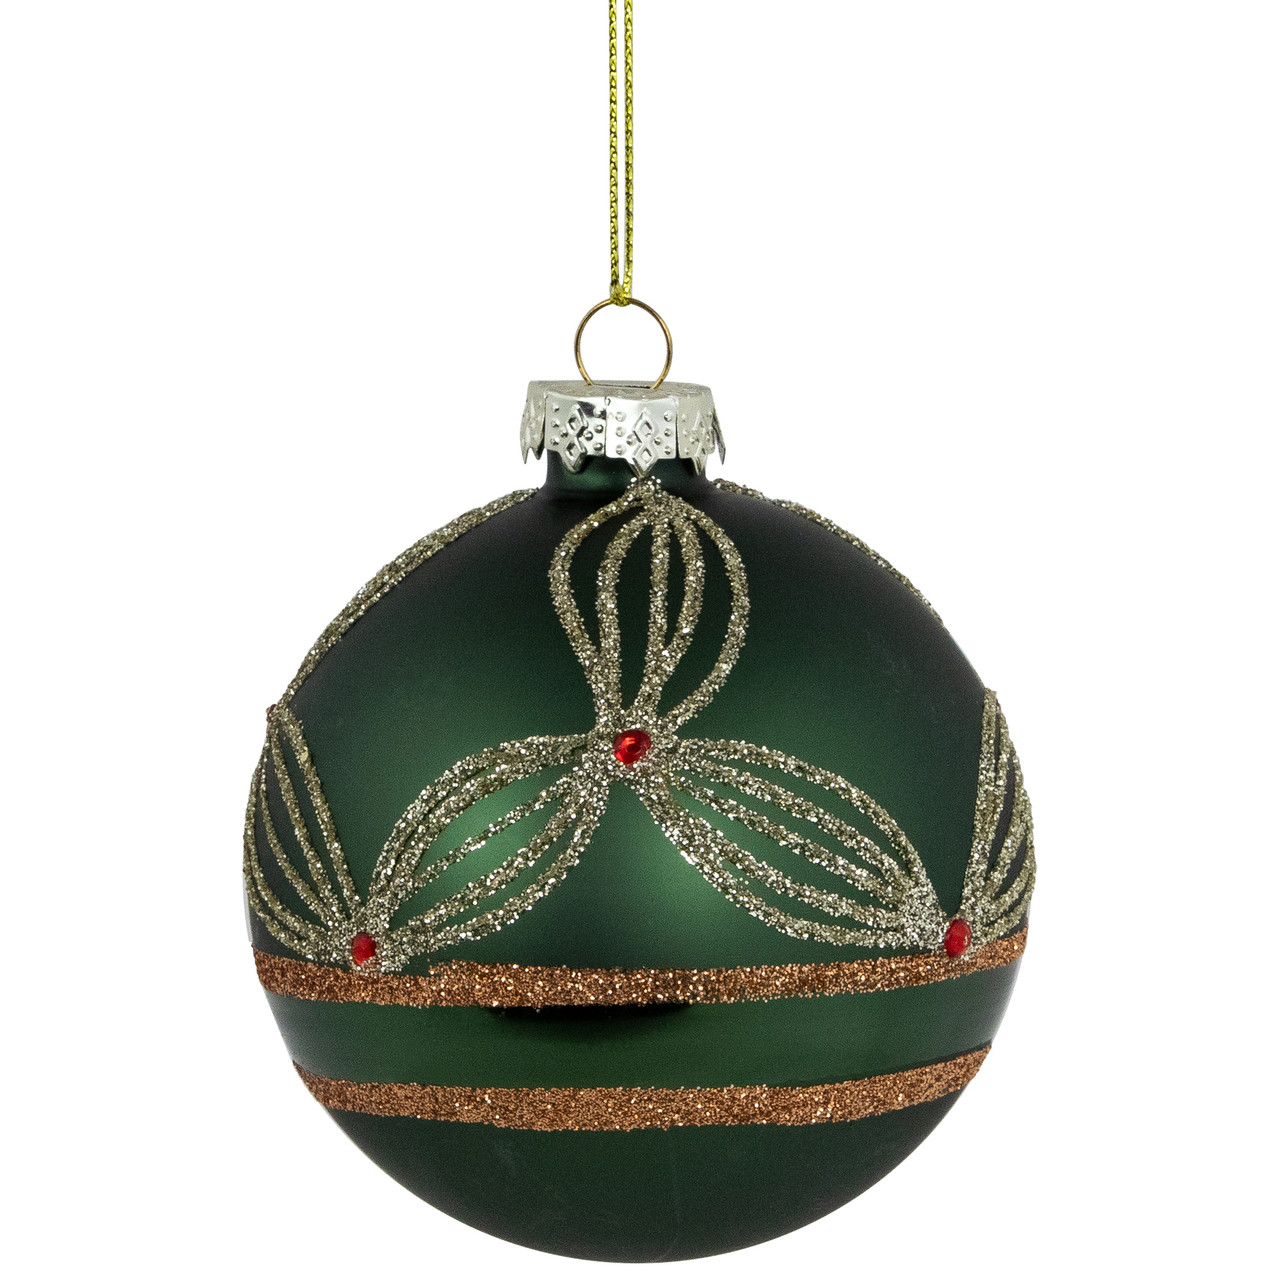 3.25 inch Lime Green Furry Ornament Ball